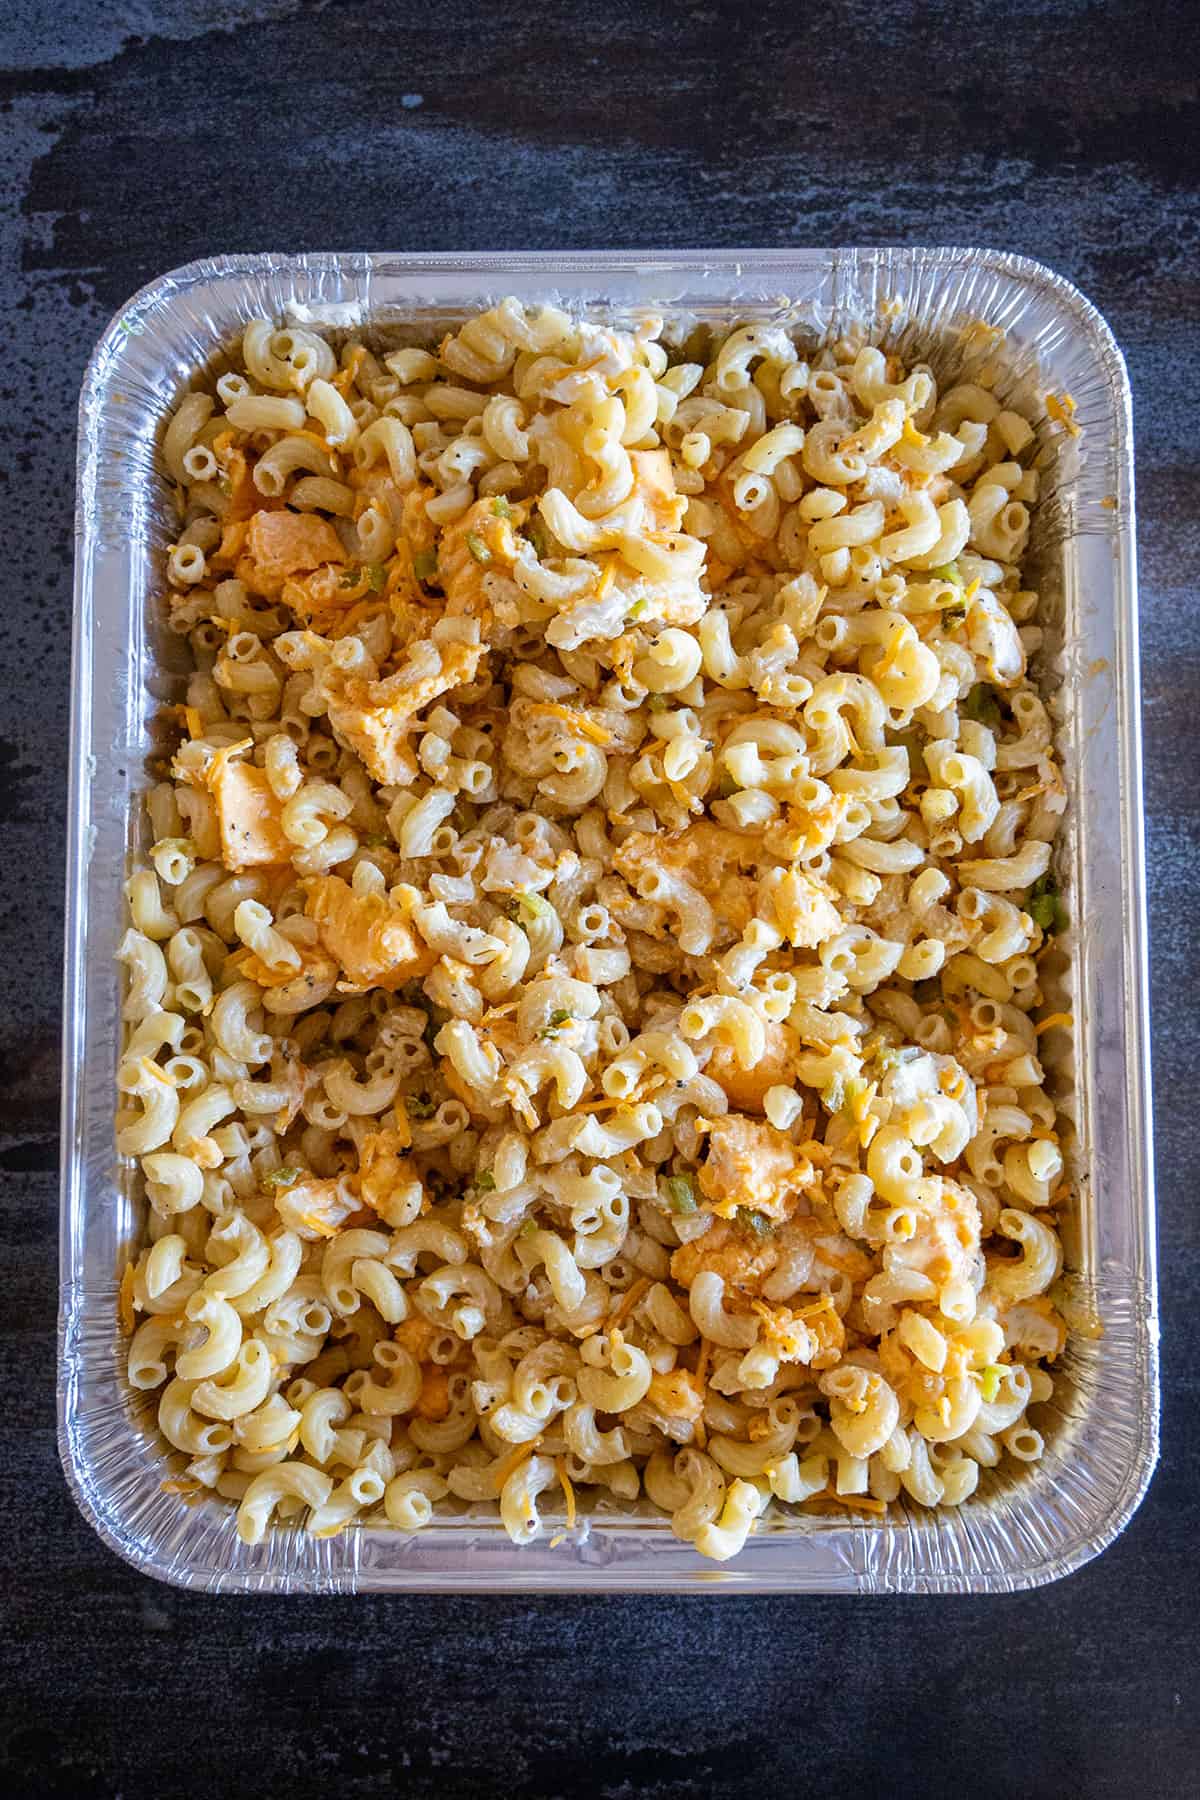 Elbow macaroni mixed with cheeses, chiles and spices.